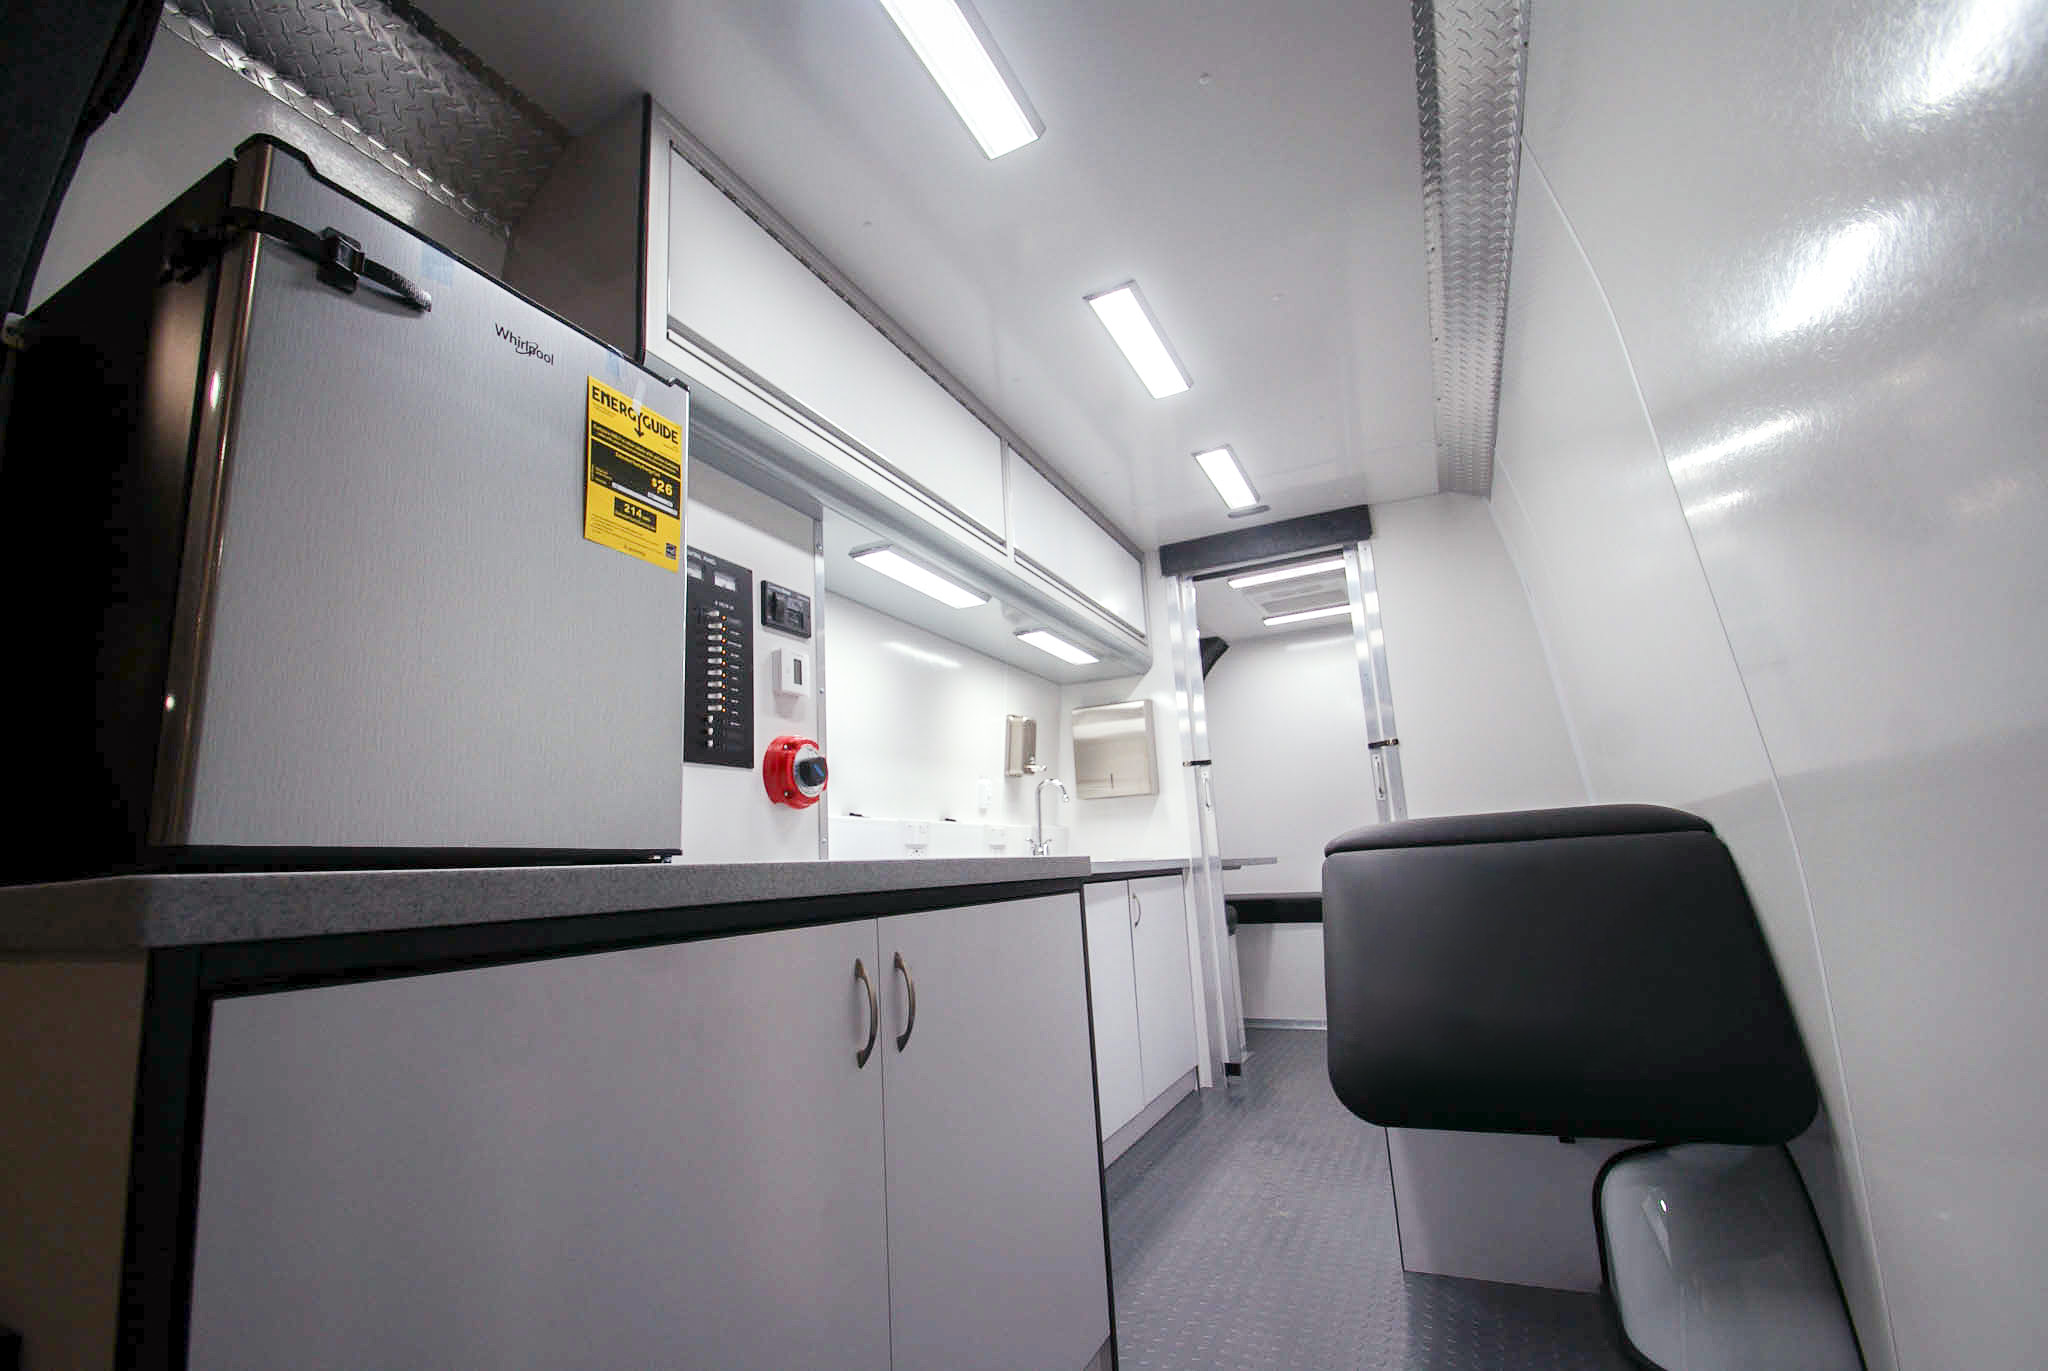 An angled view of the Mobile Medical Exam sprinter's back room as viewed from the rear entrance.